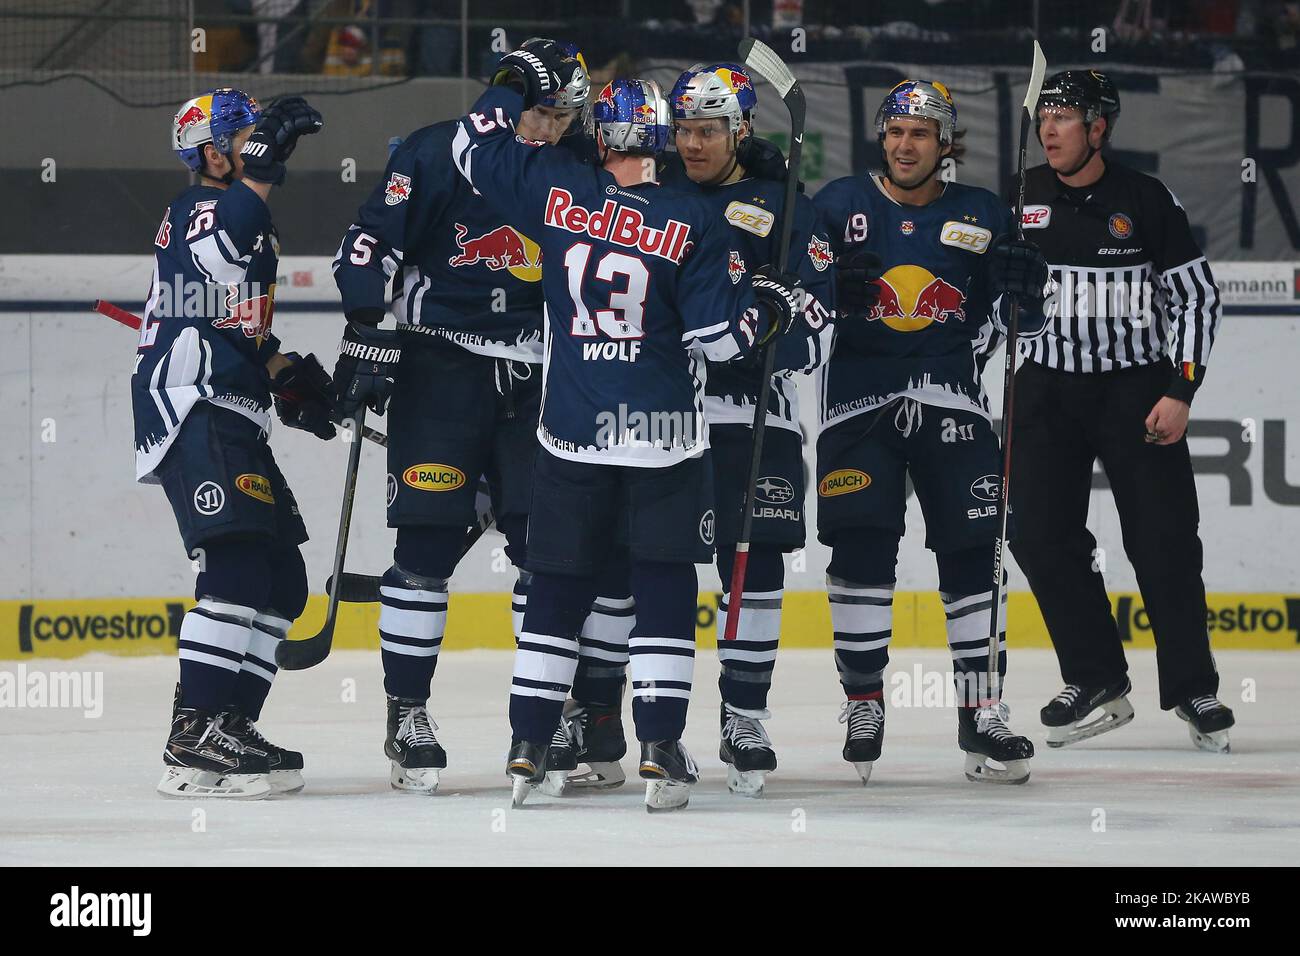 Rejoicing of Munich during the 46th game day of the German Ice Hockey League between Red Bull Munich and Koelner Haie in the Olympia Eissportzentrum in Munich, Germany, on January 26, 2018. (Photo by Marcel Engelbrecht/NurPhoto) Stock Photo